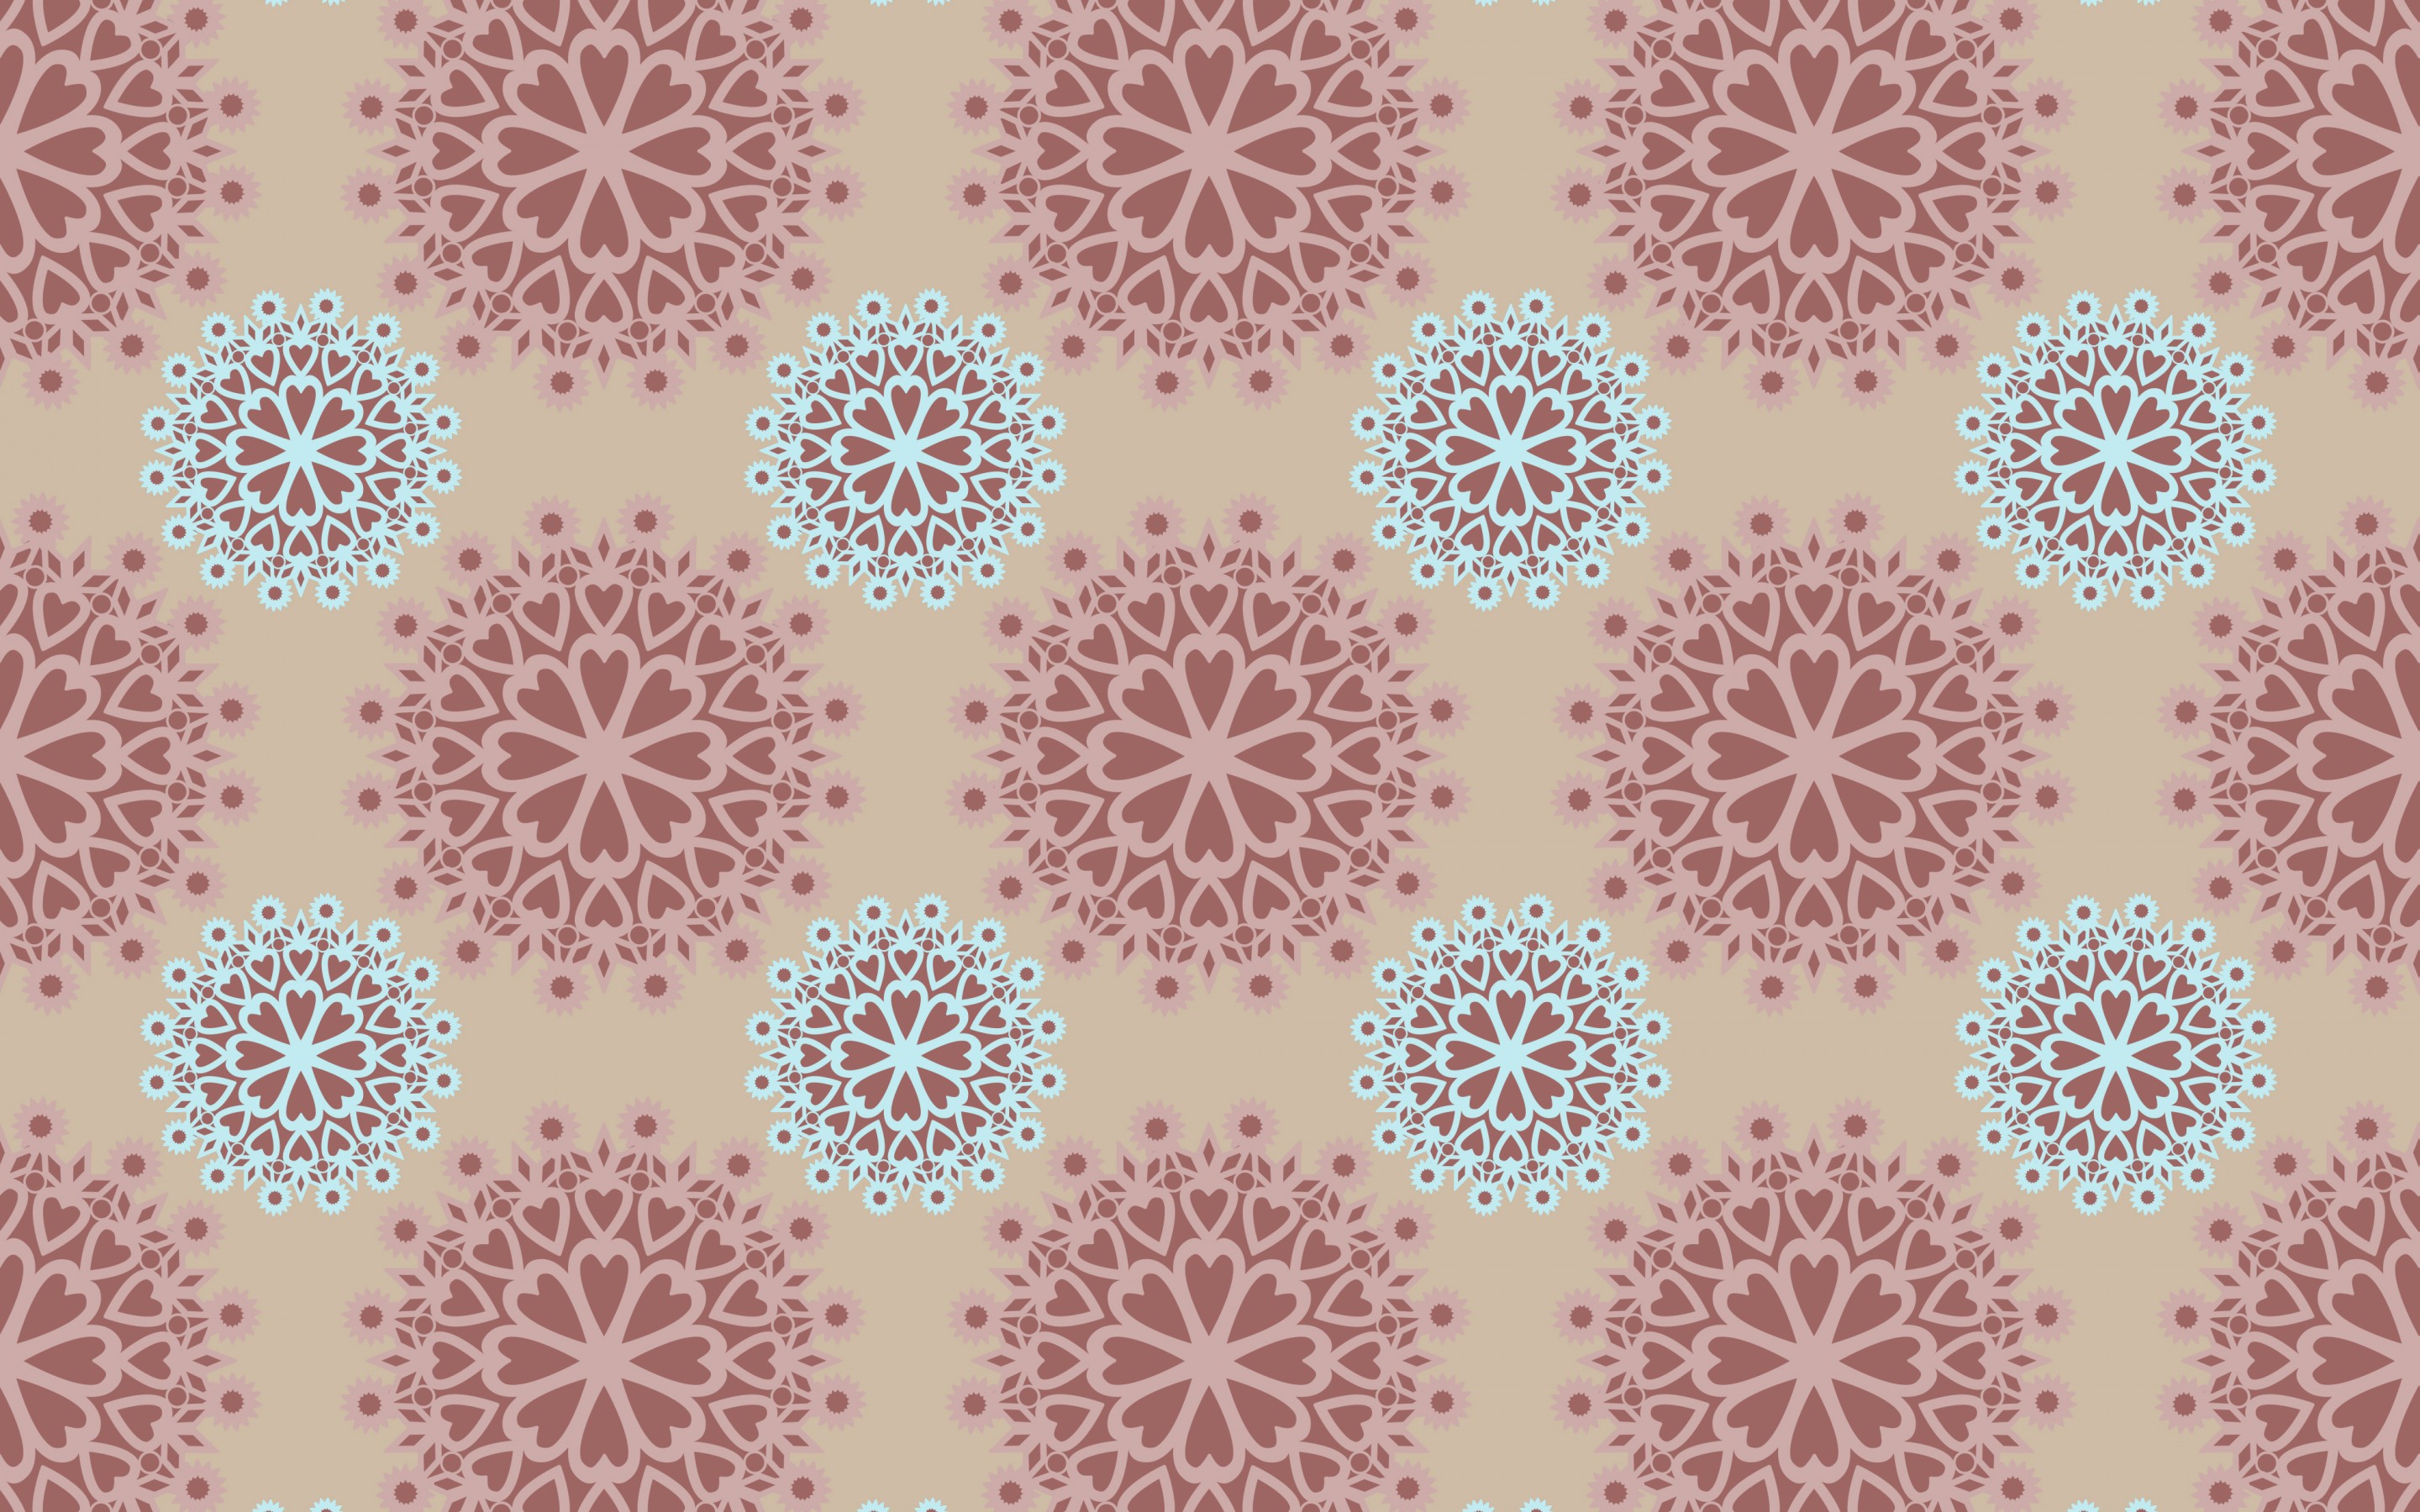 ornament, background, pattern, texture, textures